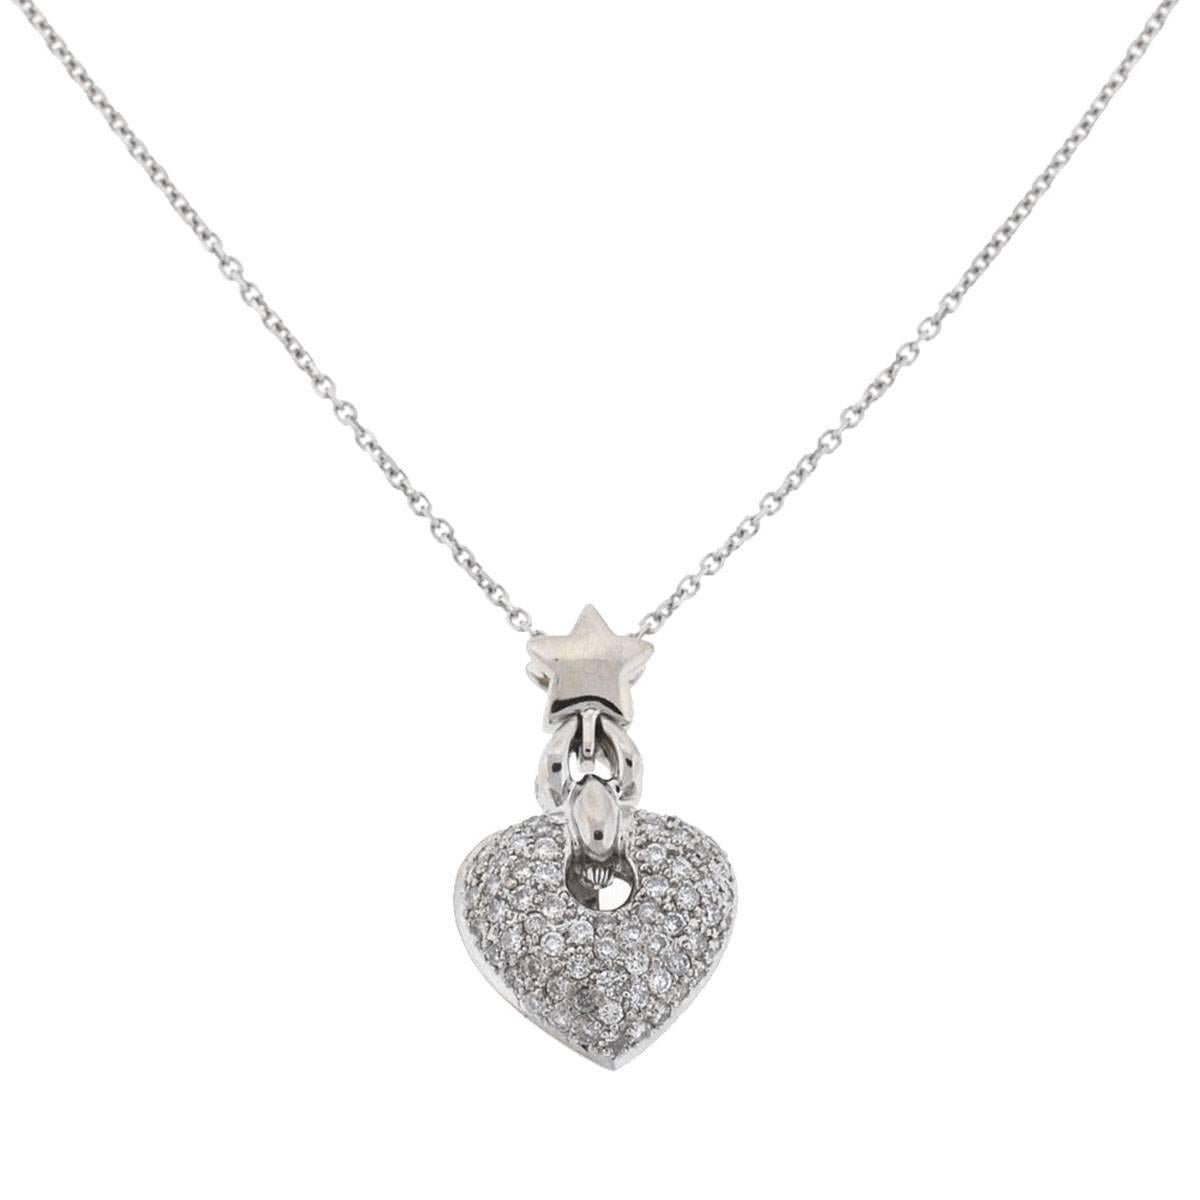 Style - Pave Diamond Heart Pendant Necklace
Metal - Pendant - 18k White Gold - Chain  - 14k White Gold
Weight - 7.5 grams
Stones - Diamonds - approx. .70 cts - Chain length - 18